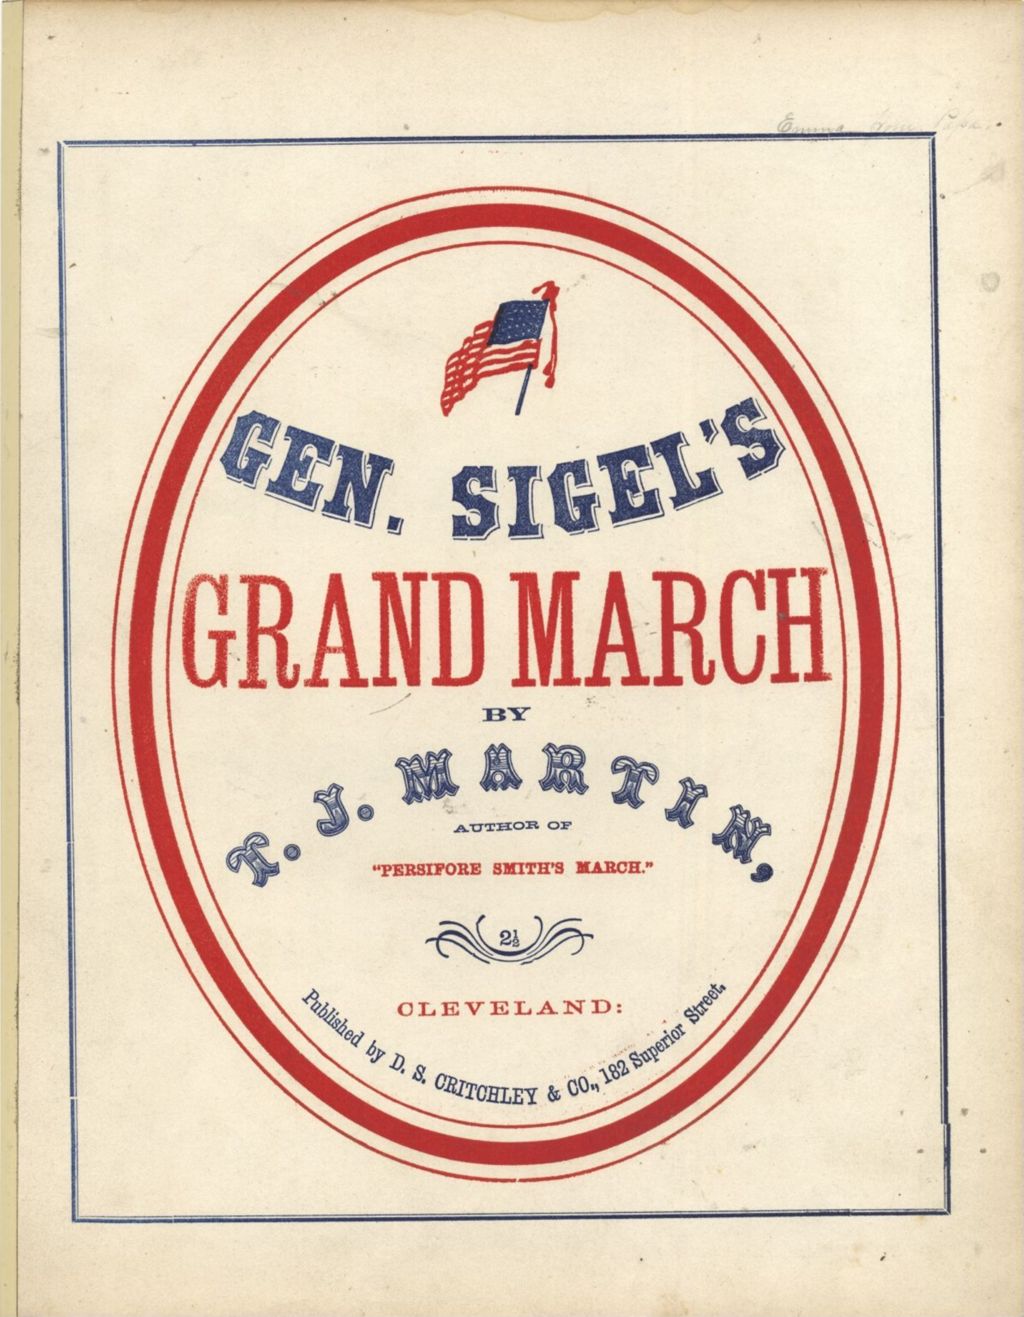 Miniature of General Sigel's Grand March